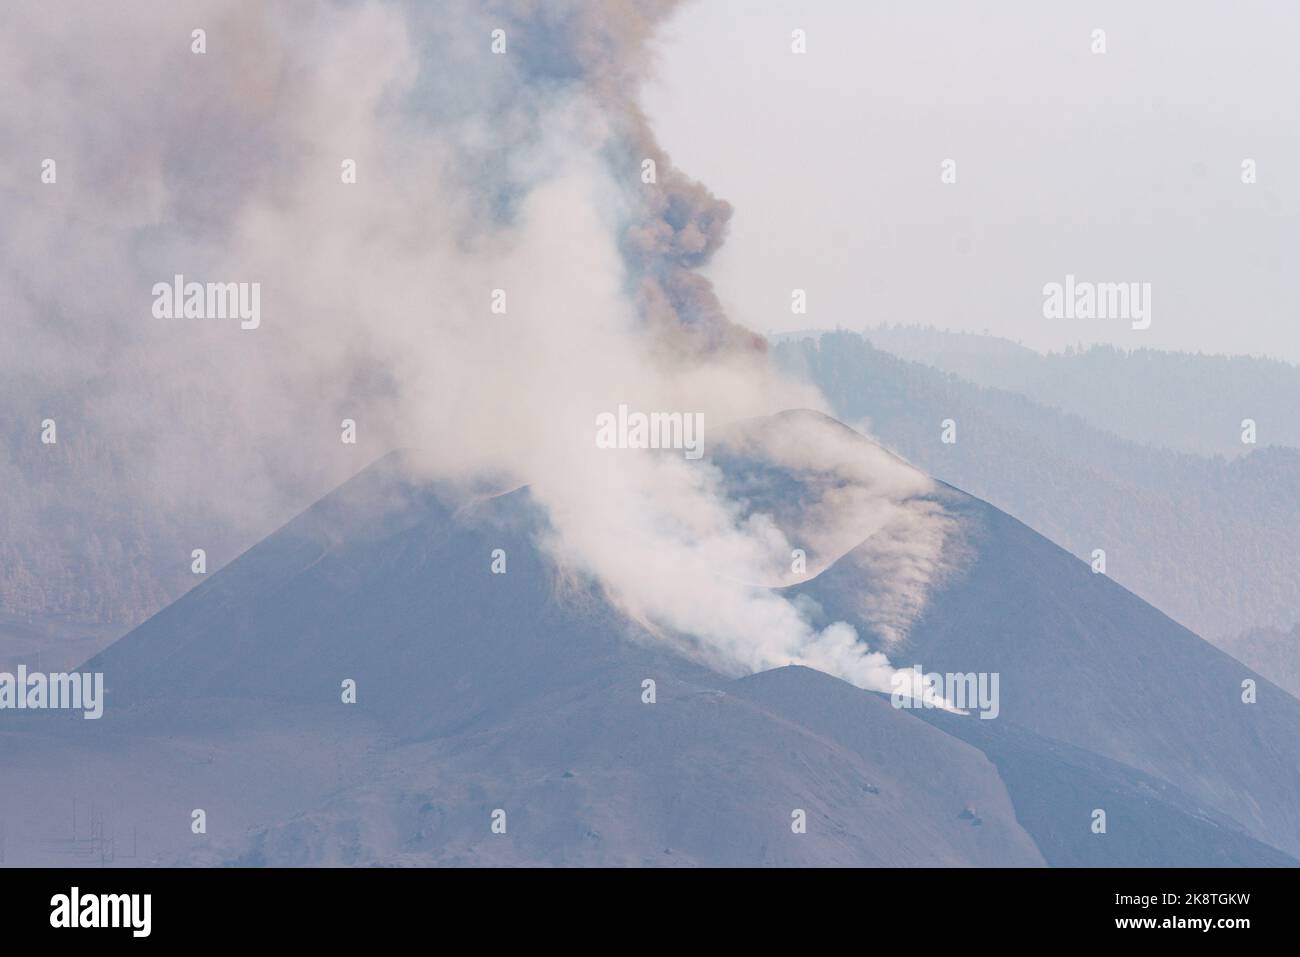 Thick steam coming out of the top of a volcano mountain Stock Photo